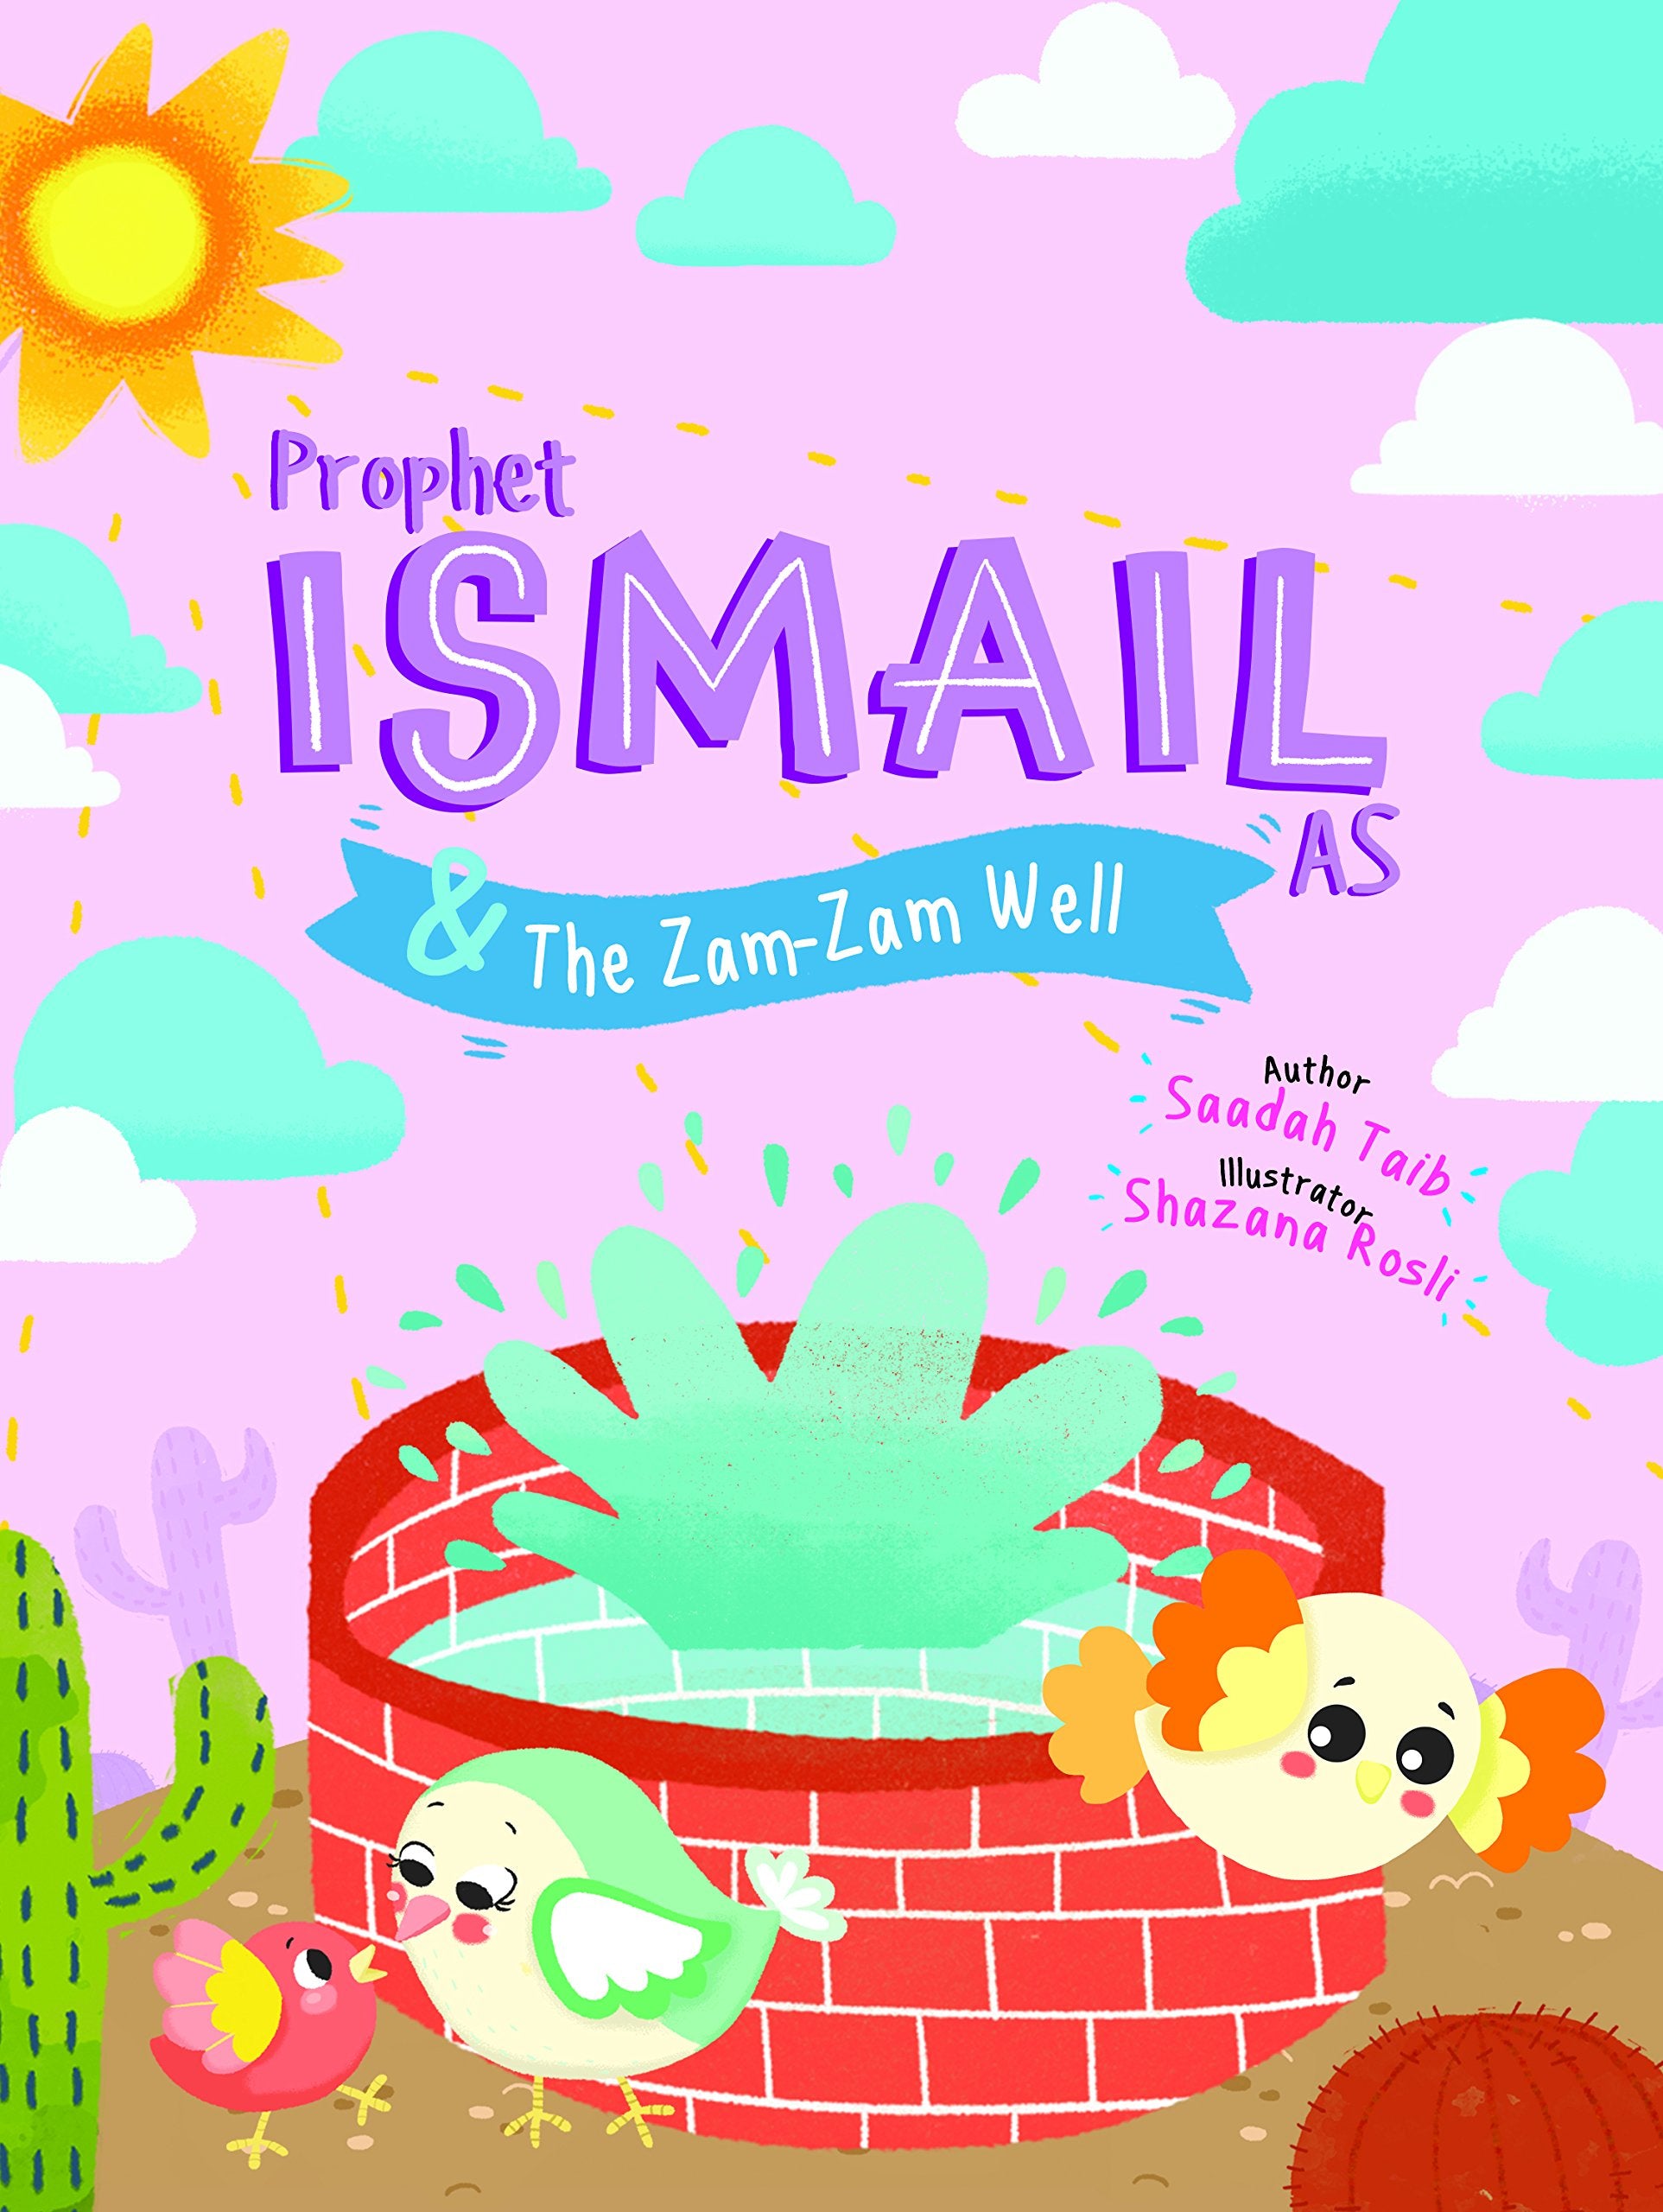 The Prophets of Islam Activity Book- Prophet Ismail & The Zam-Zam Well